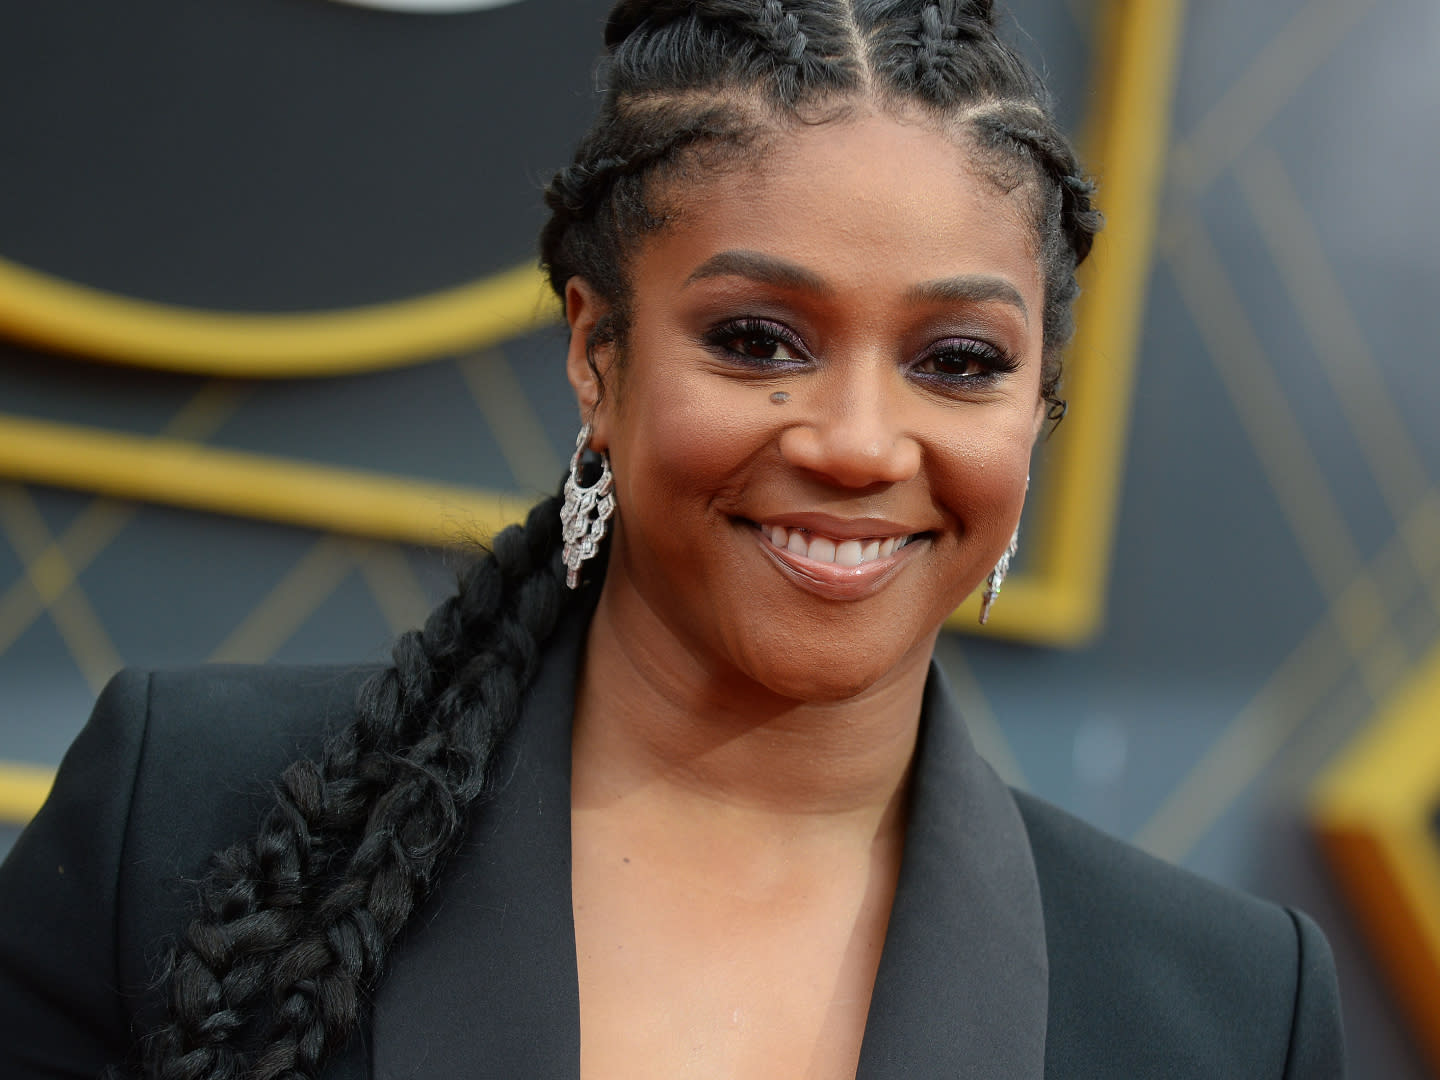 Tiffany Haddish Has Never Felt This Way About a Relationship - Yahoo Entertainment